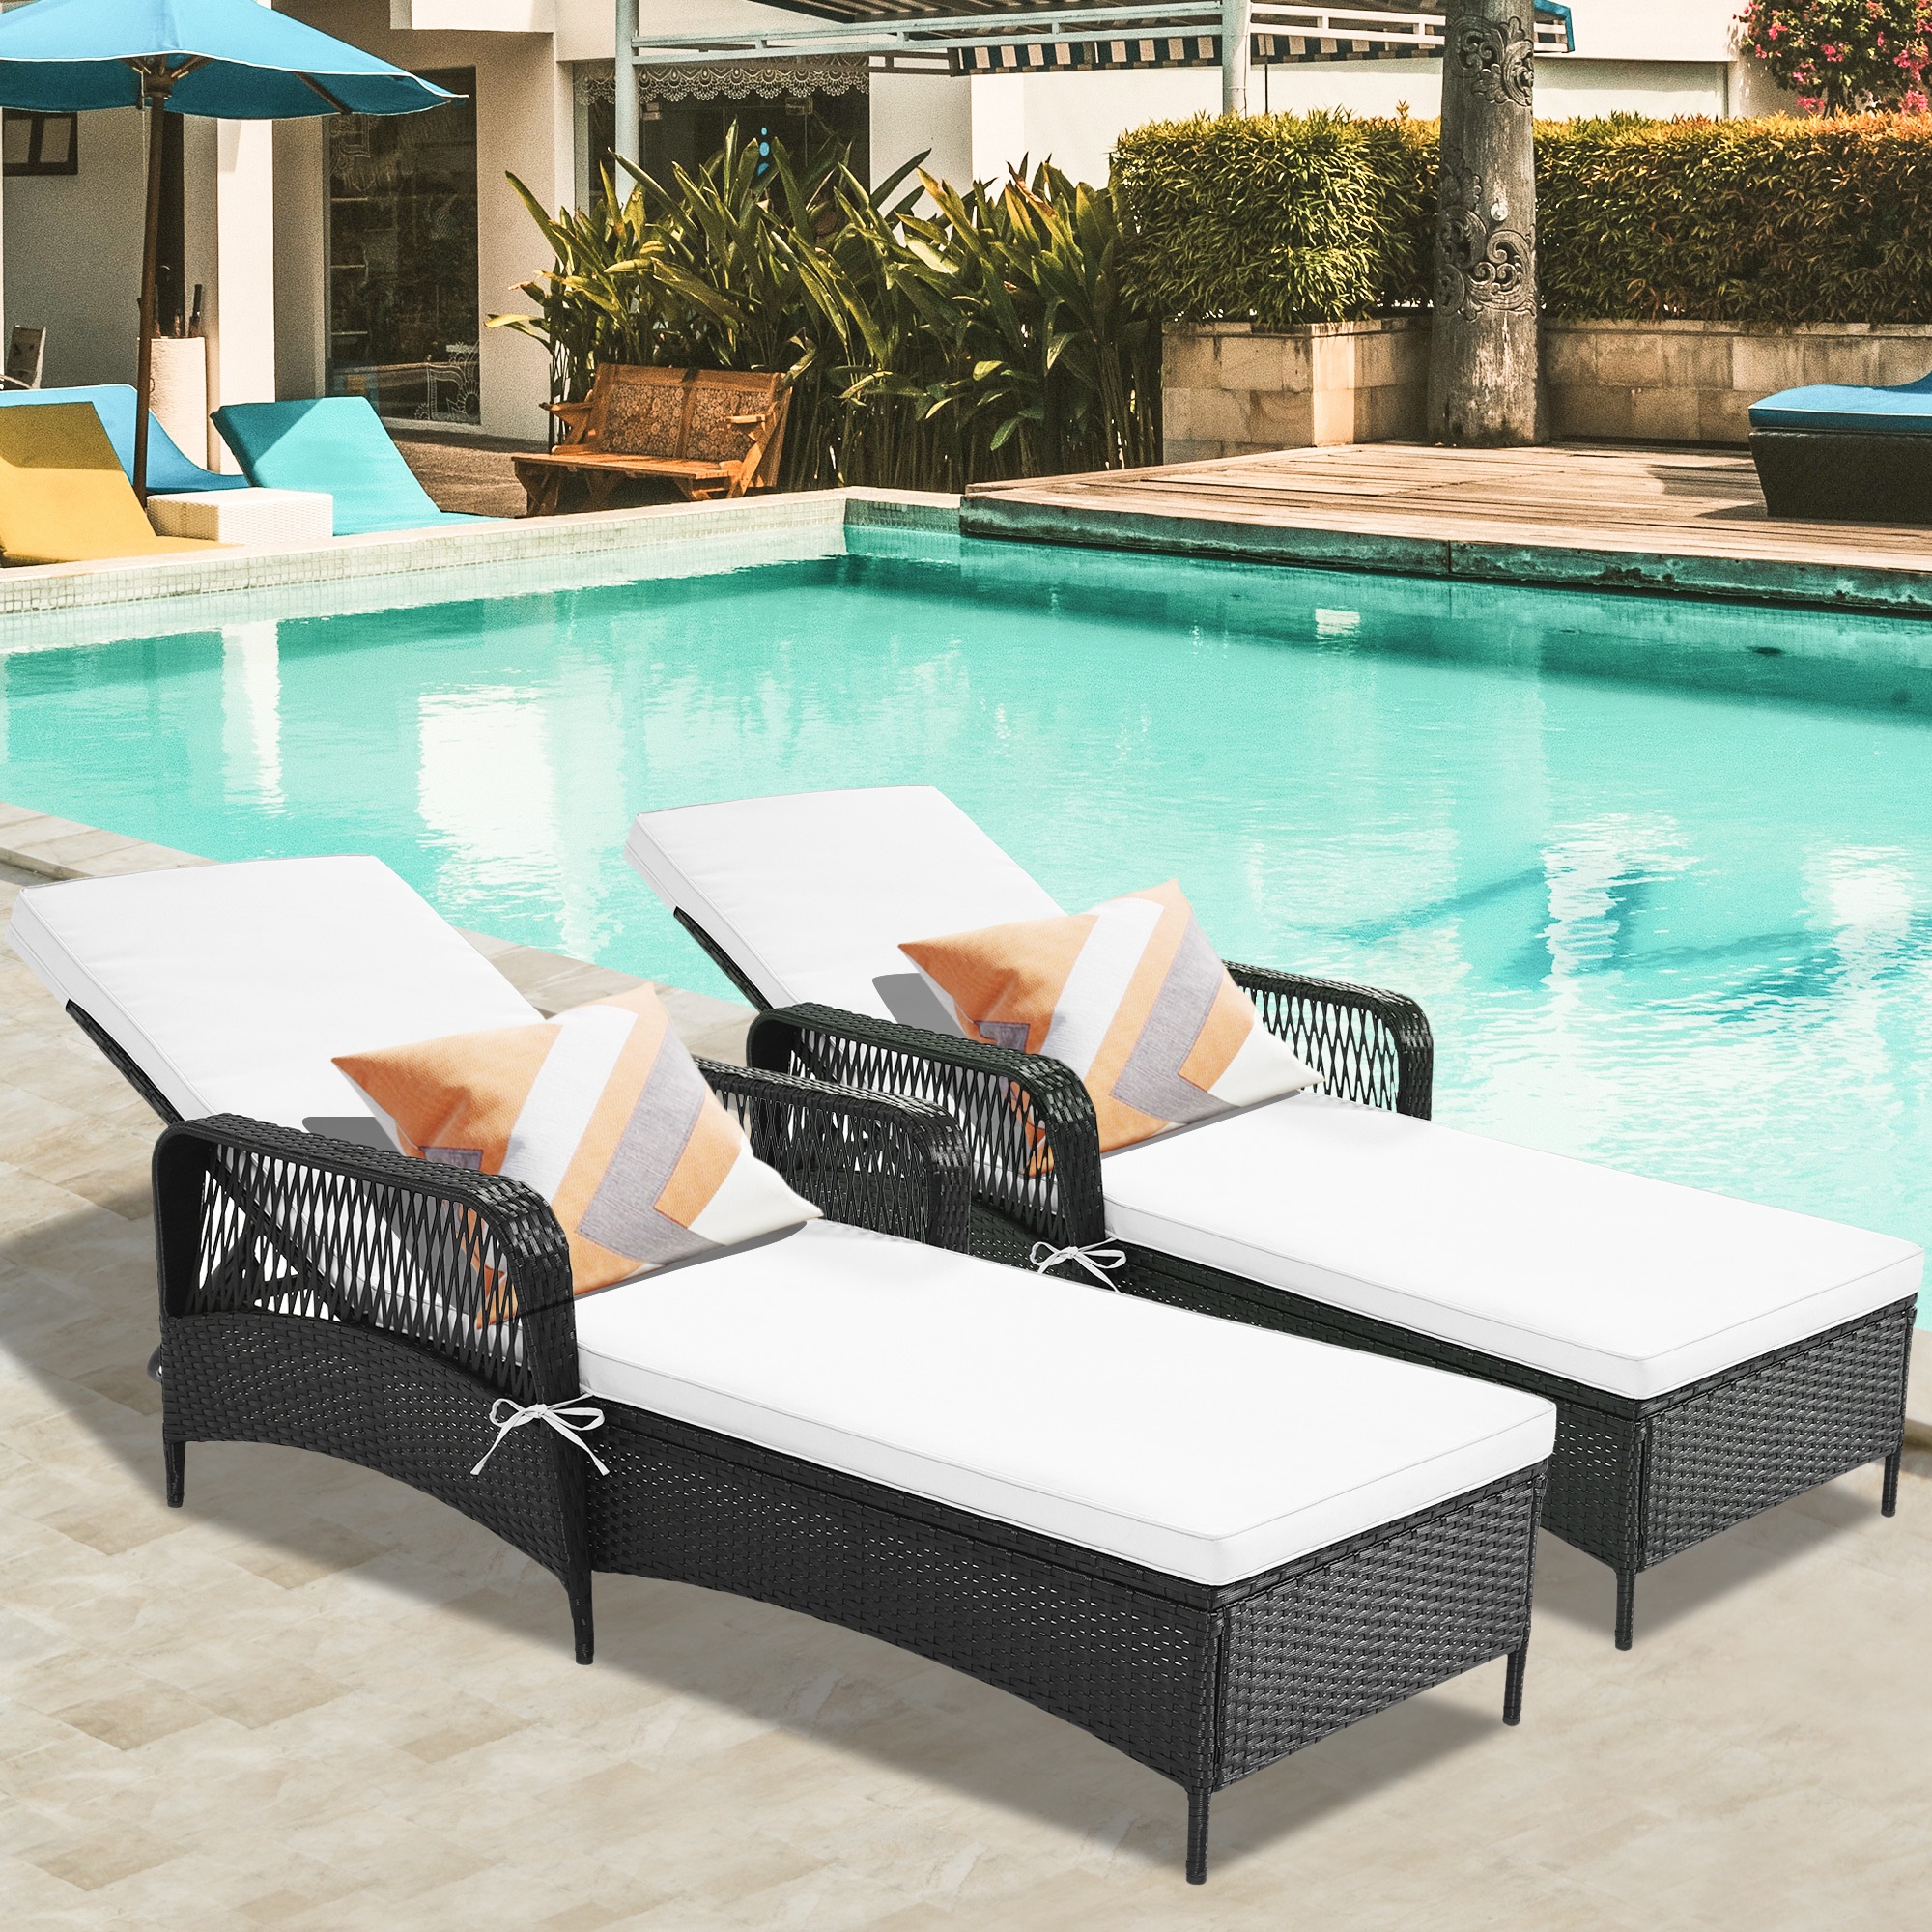 Chaise Lounge Chairs for Outside 2 Pieces, Patio Adjustable Lounge Chairs Set of 2, Outdoor Rattan Wicker Pool Chaise Lounge Chairs Cushioned Poolside Chaise Lounge Set, Beige - image 2 of 11